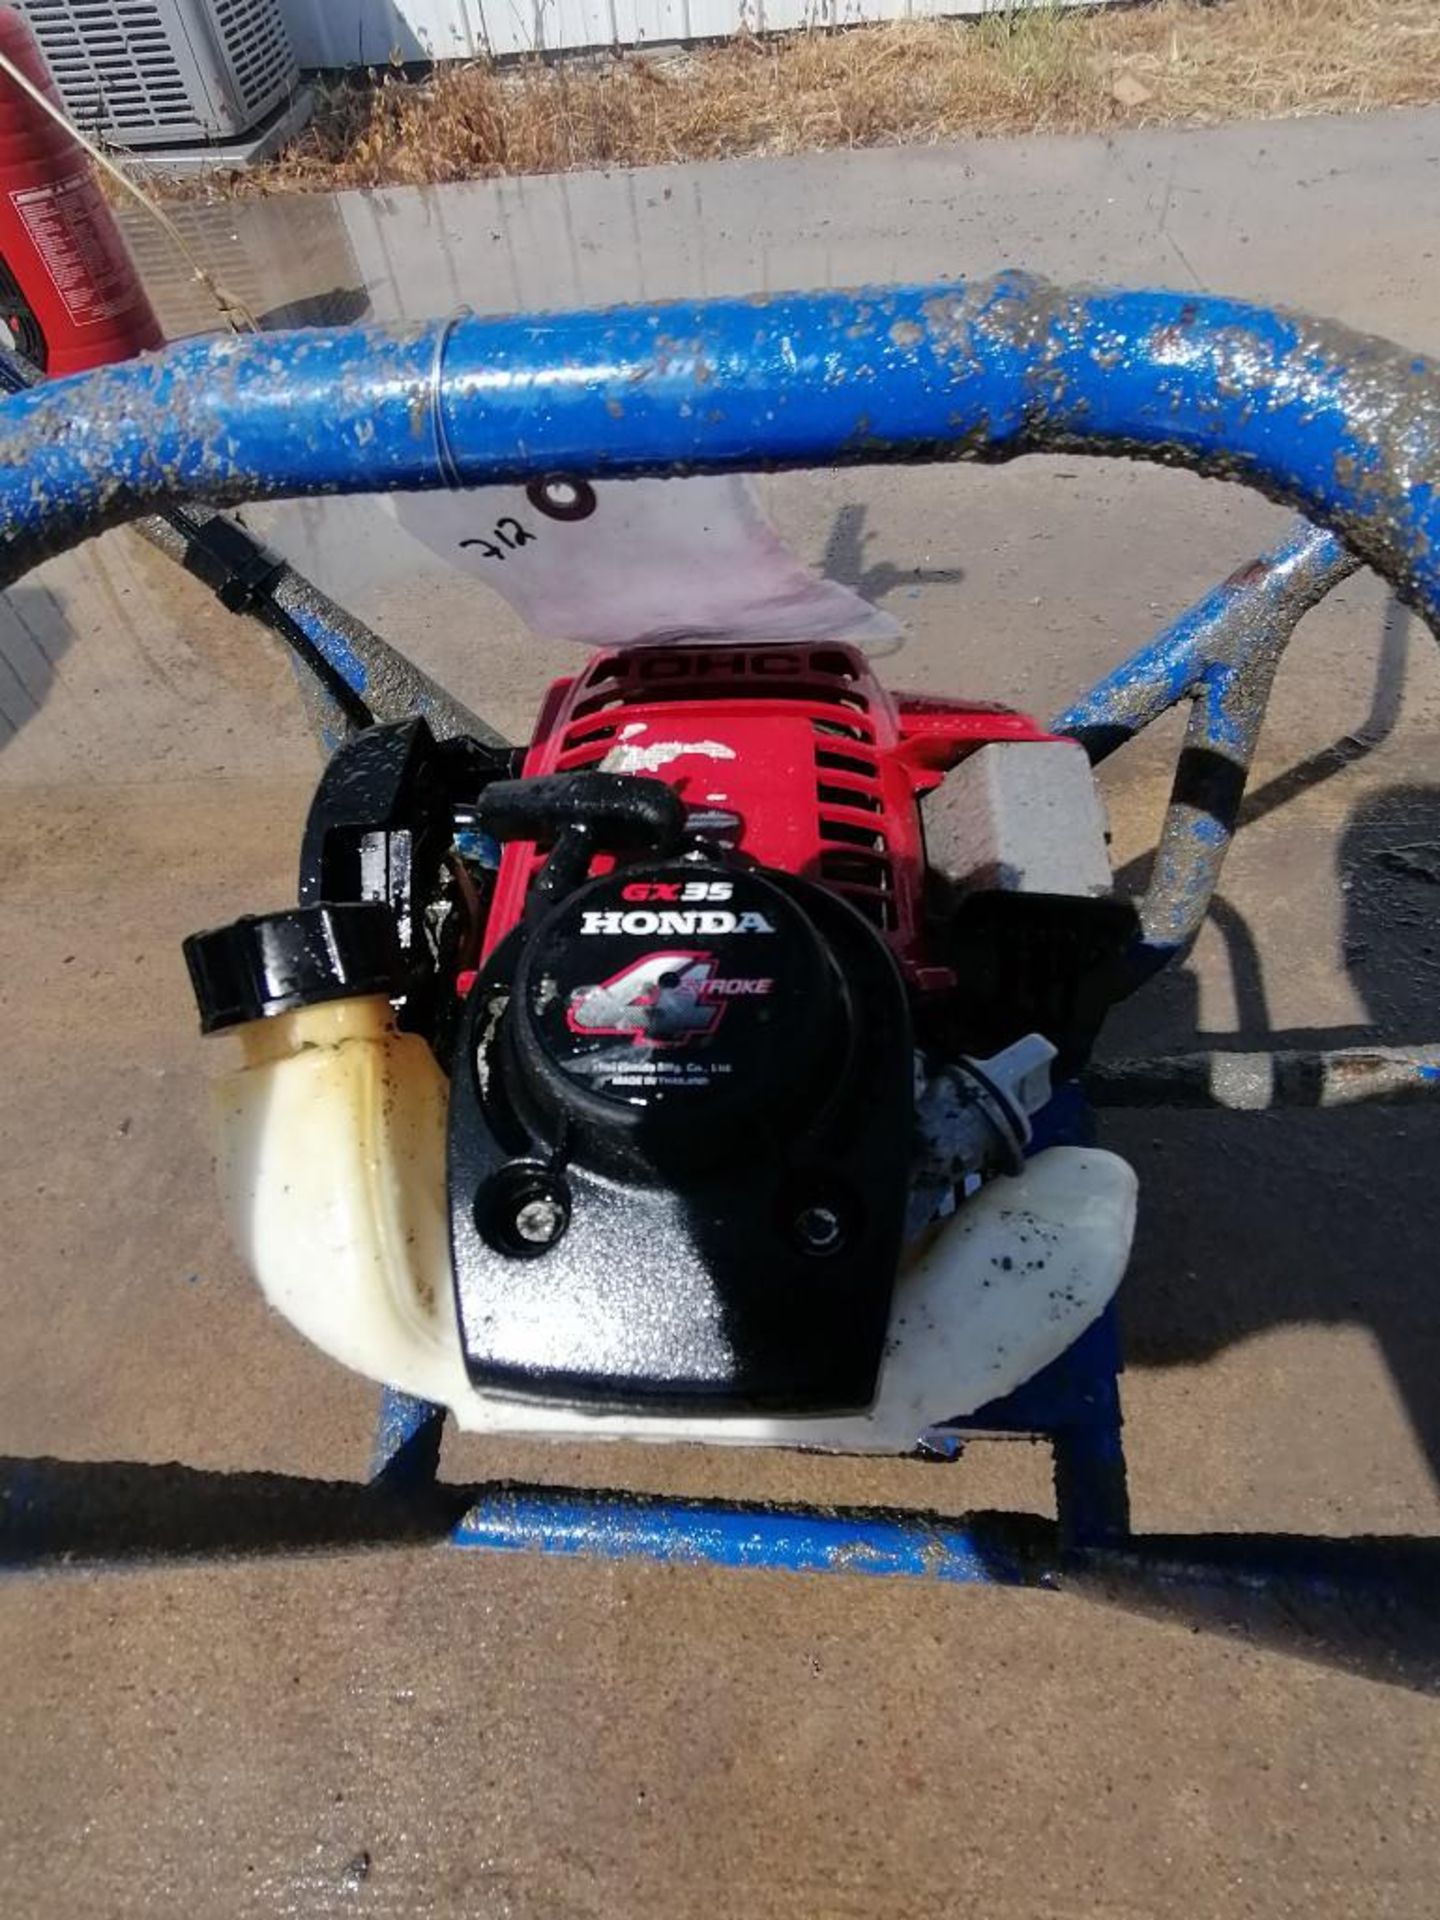 Shockwave Power Screed with Honda GX35 Motor. Serial #5903, 52 Hours. Located in Mt. Pleasant, IA - Image 2 of 8